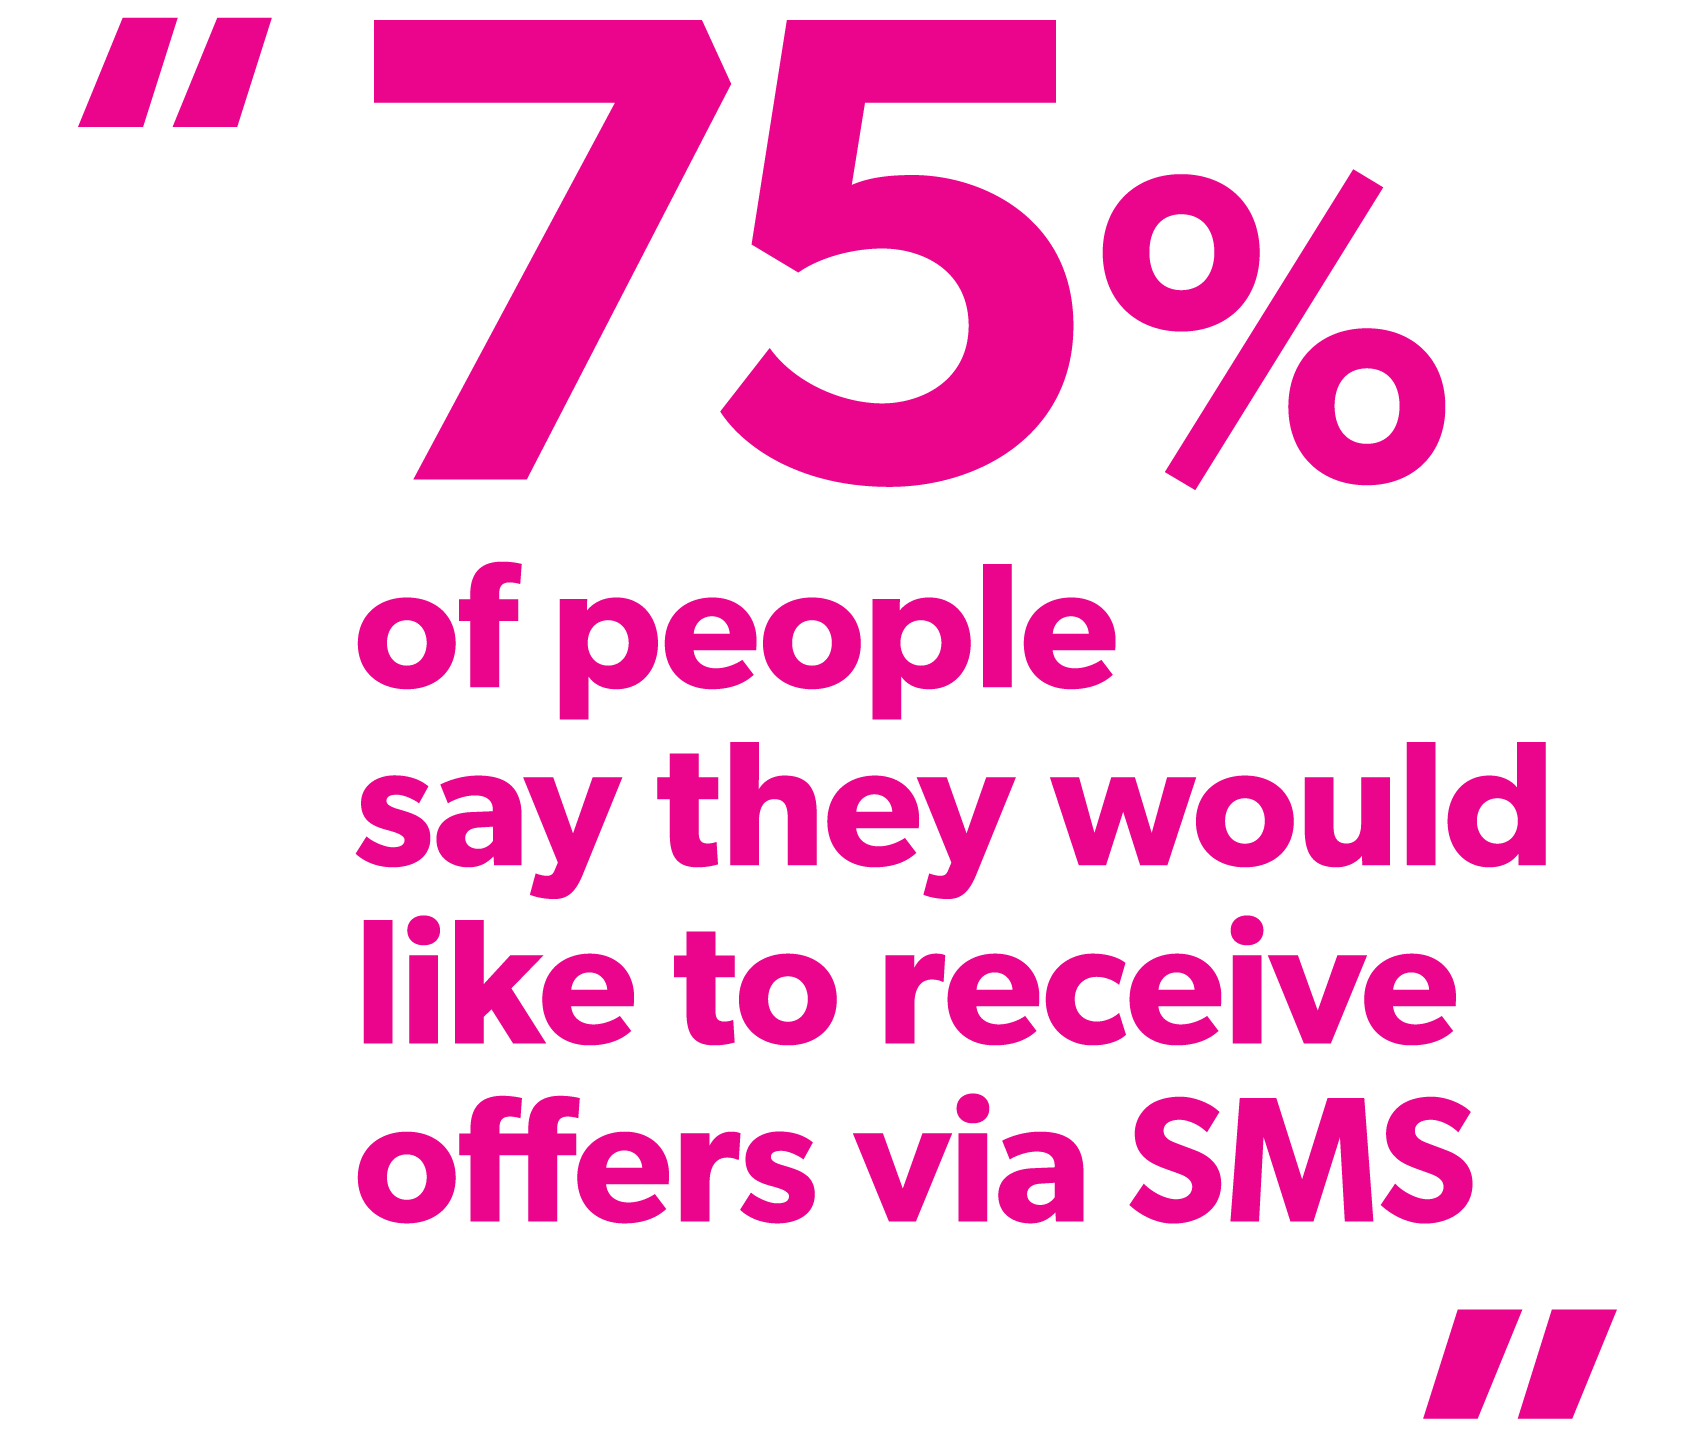 Why business don't use SMS or text messaging